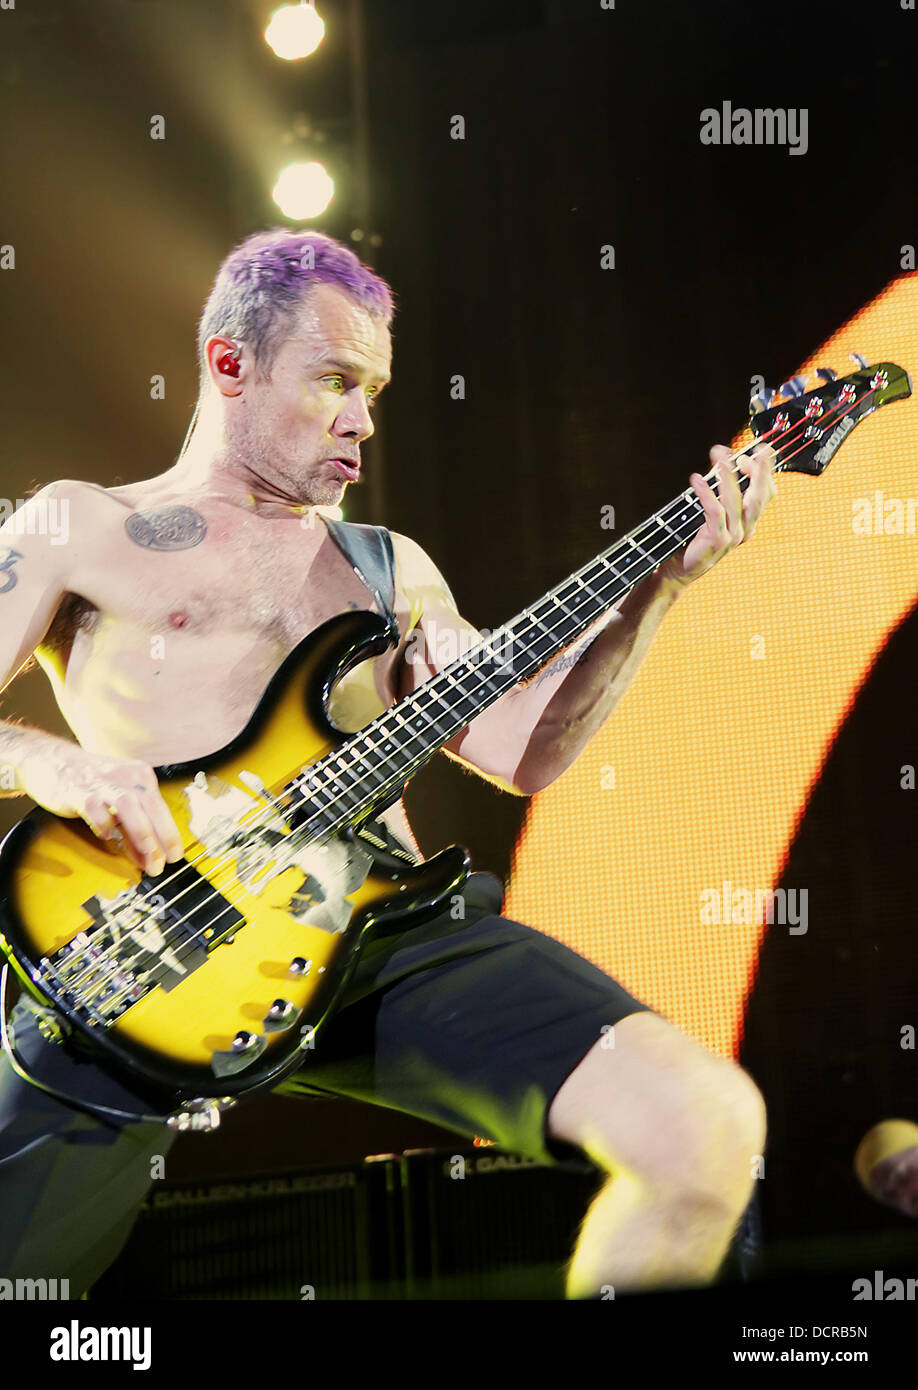 Michael Balzary aka Flea of the Red Hot Chili Peppers performing at  Manchester MEN Arena. Manchester, England - 14.11.11 Stock Photo - Alamy